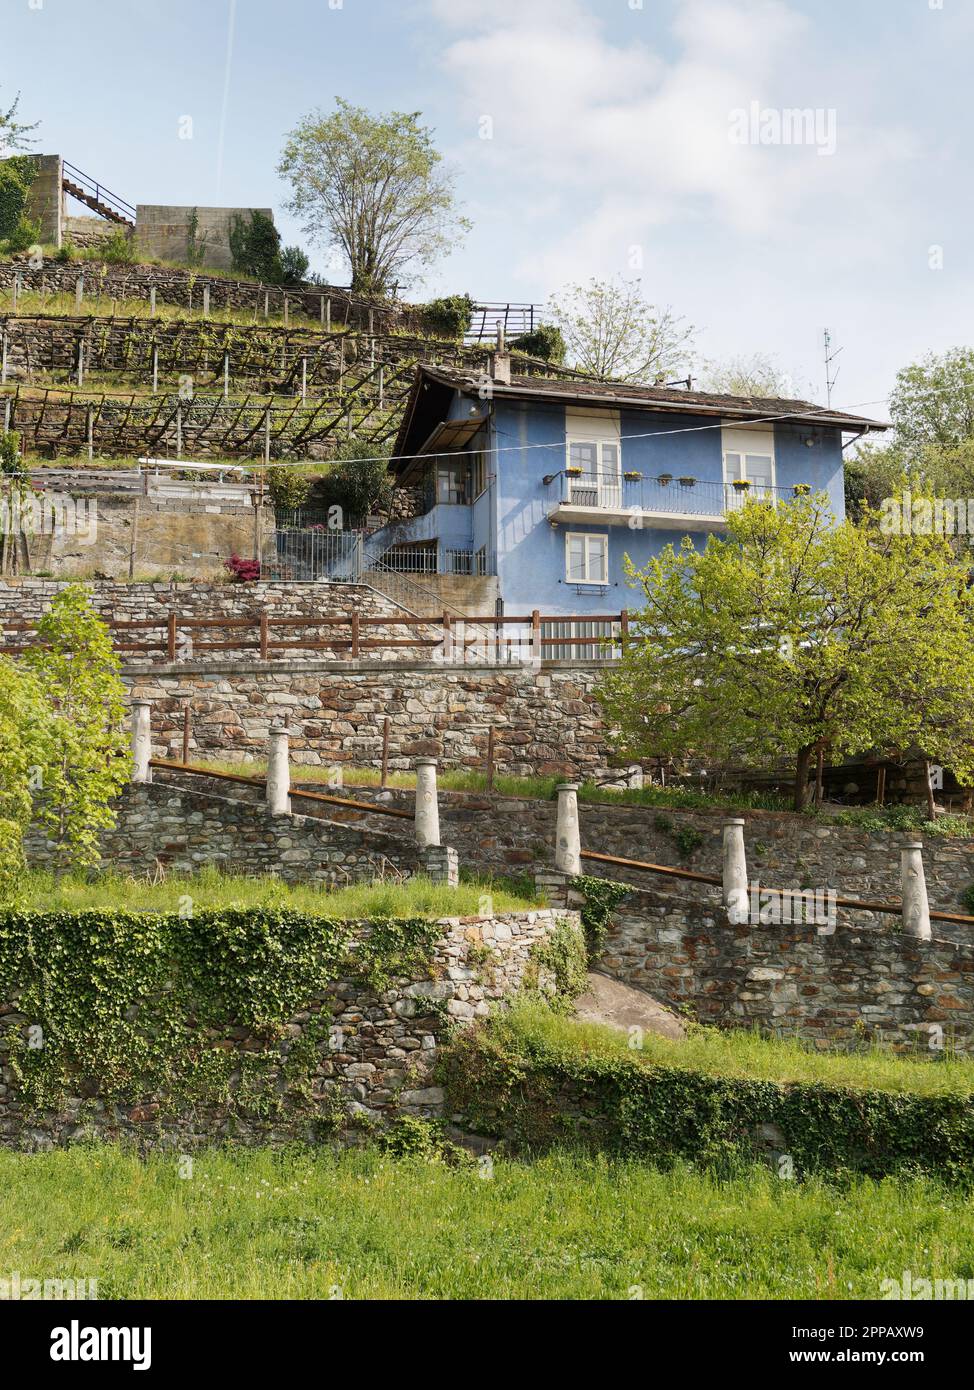 Terraced vineyards with stone walls in the town of Pont-Saint-Martin, Aosta Valley, NW Italy Stock Photo